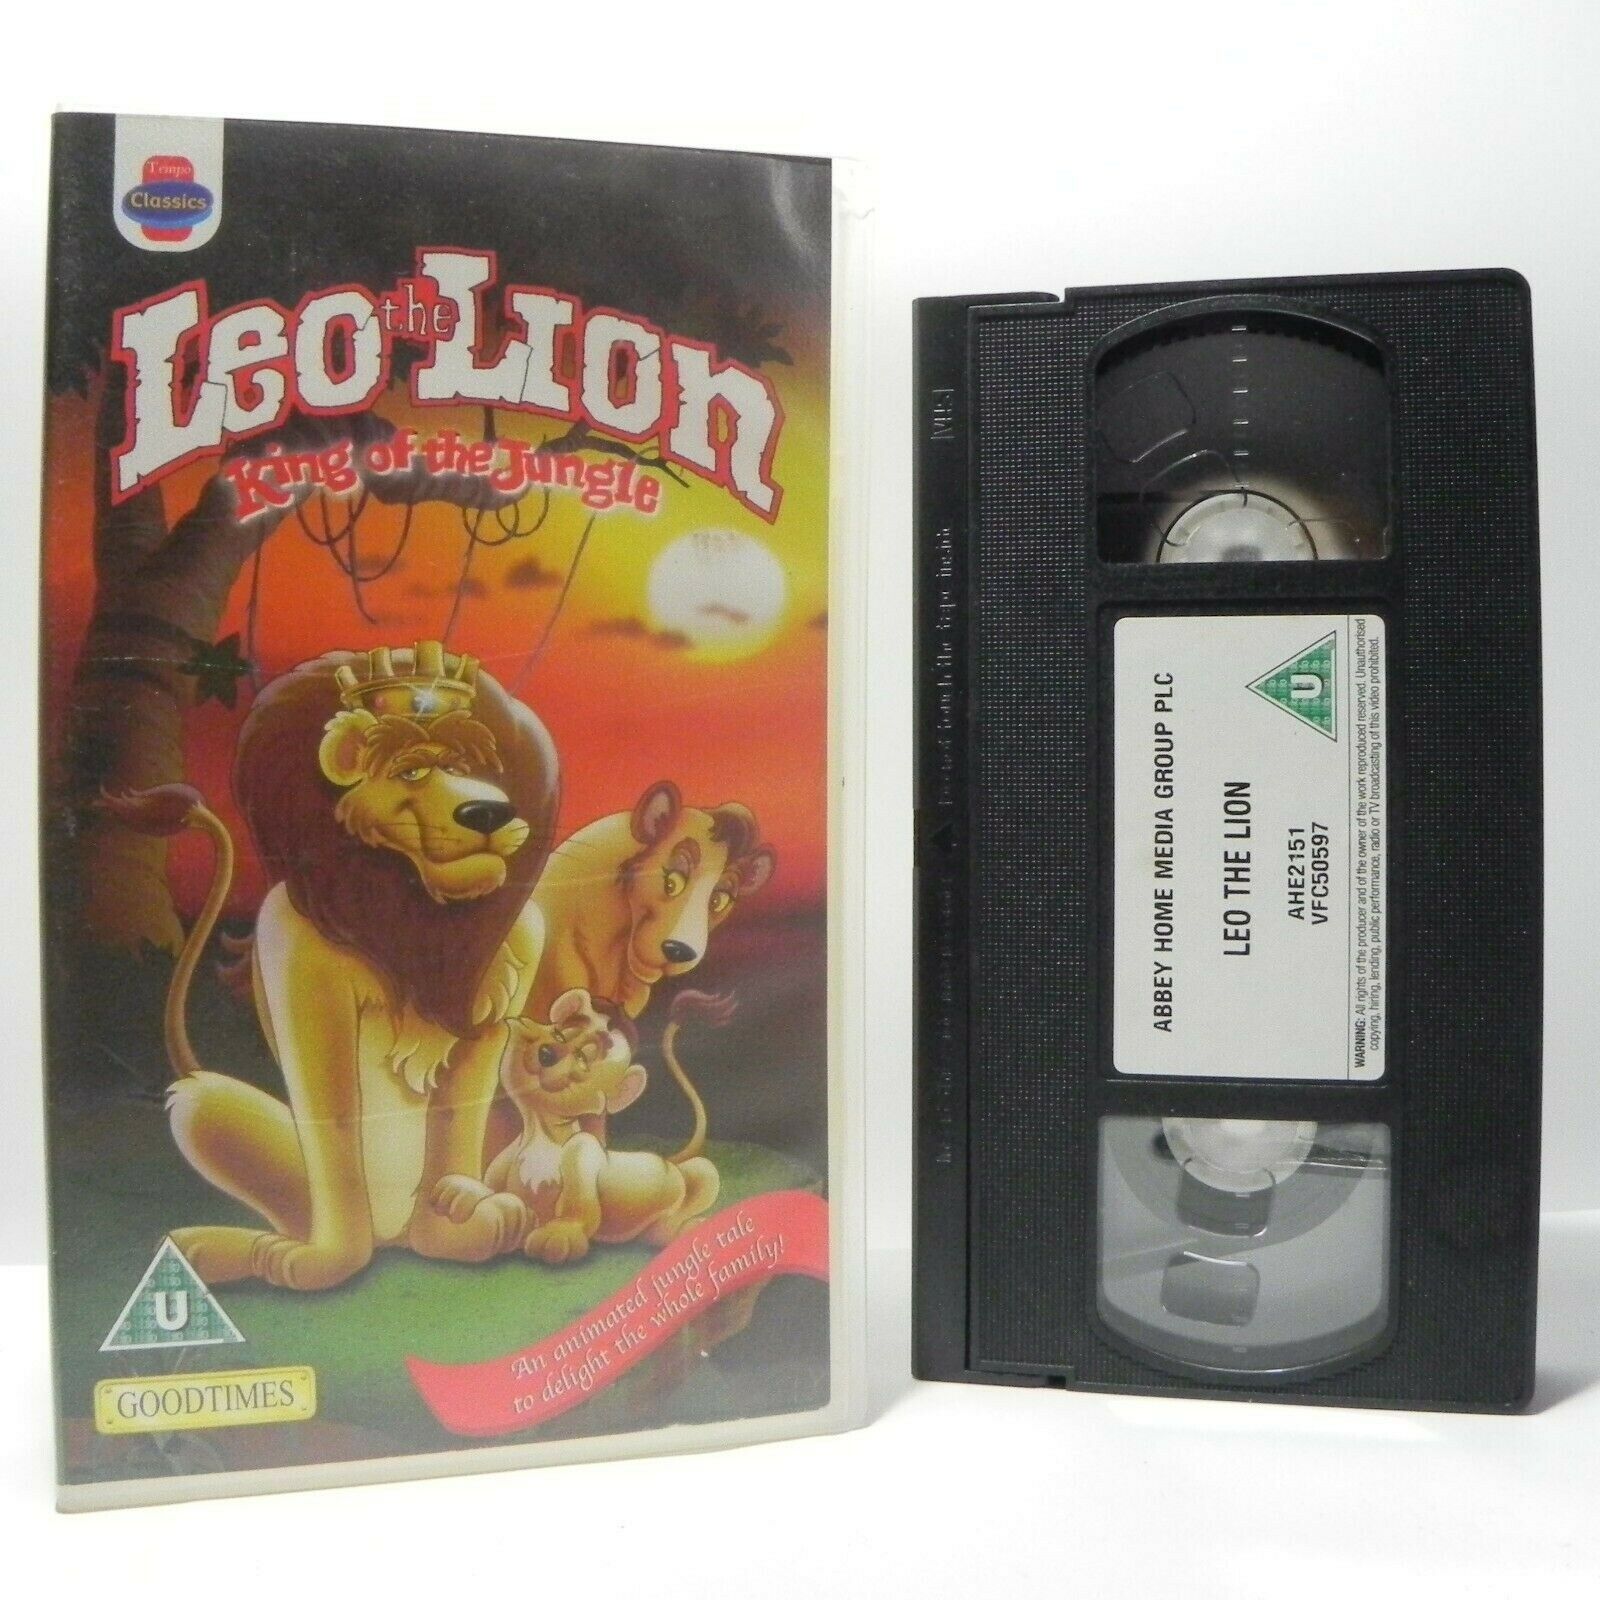 Leo The Lion: King Of The Jungle - Animated Tale - Adventure - Children's - VHS-